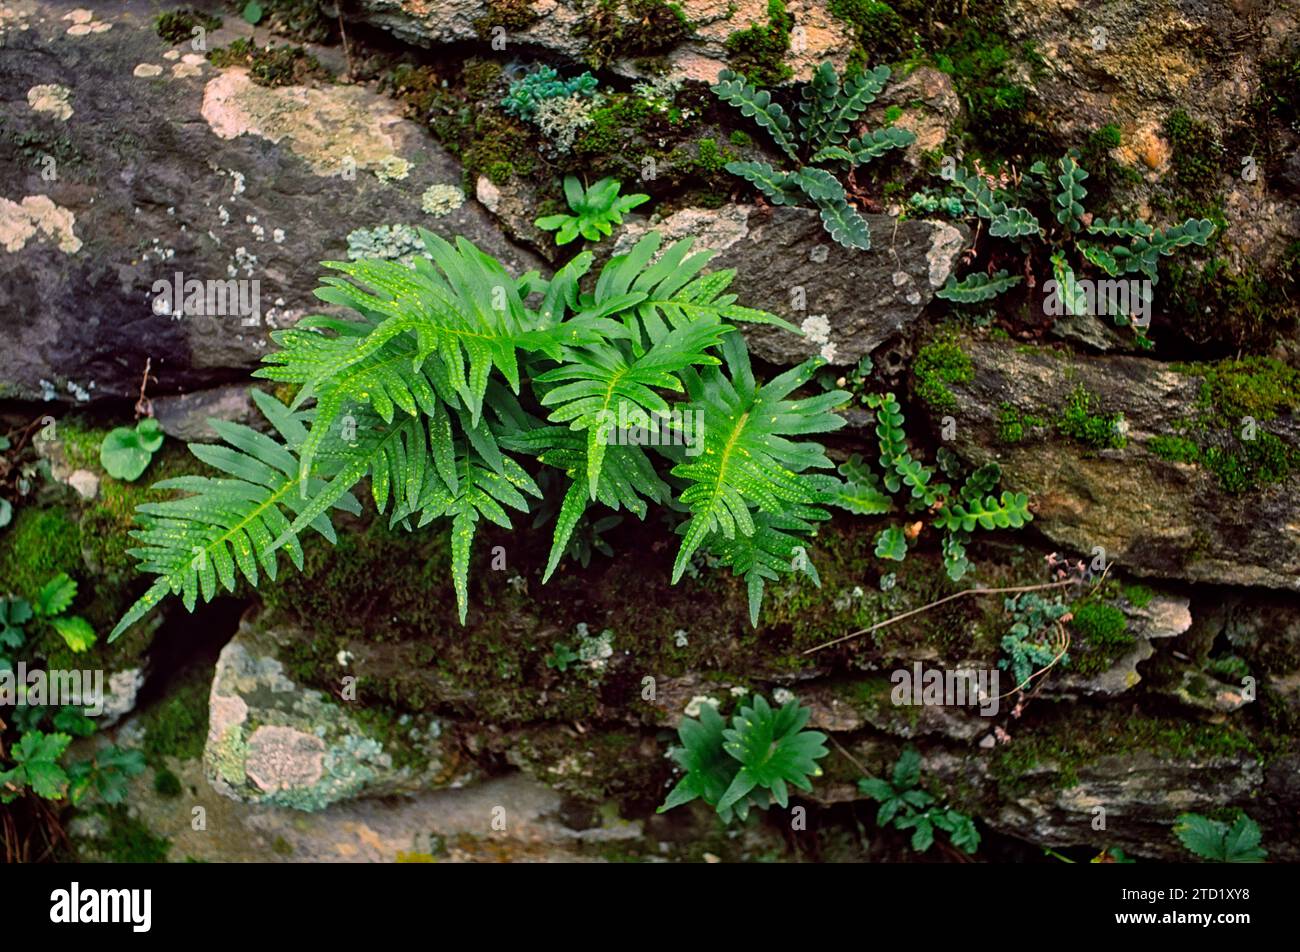 Southern polypody (Polypodium cambricum), Polypodiaceae. Fern growing between rocks. Stock Photo